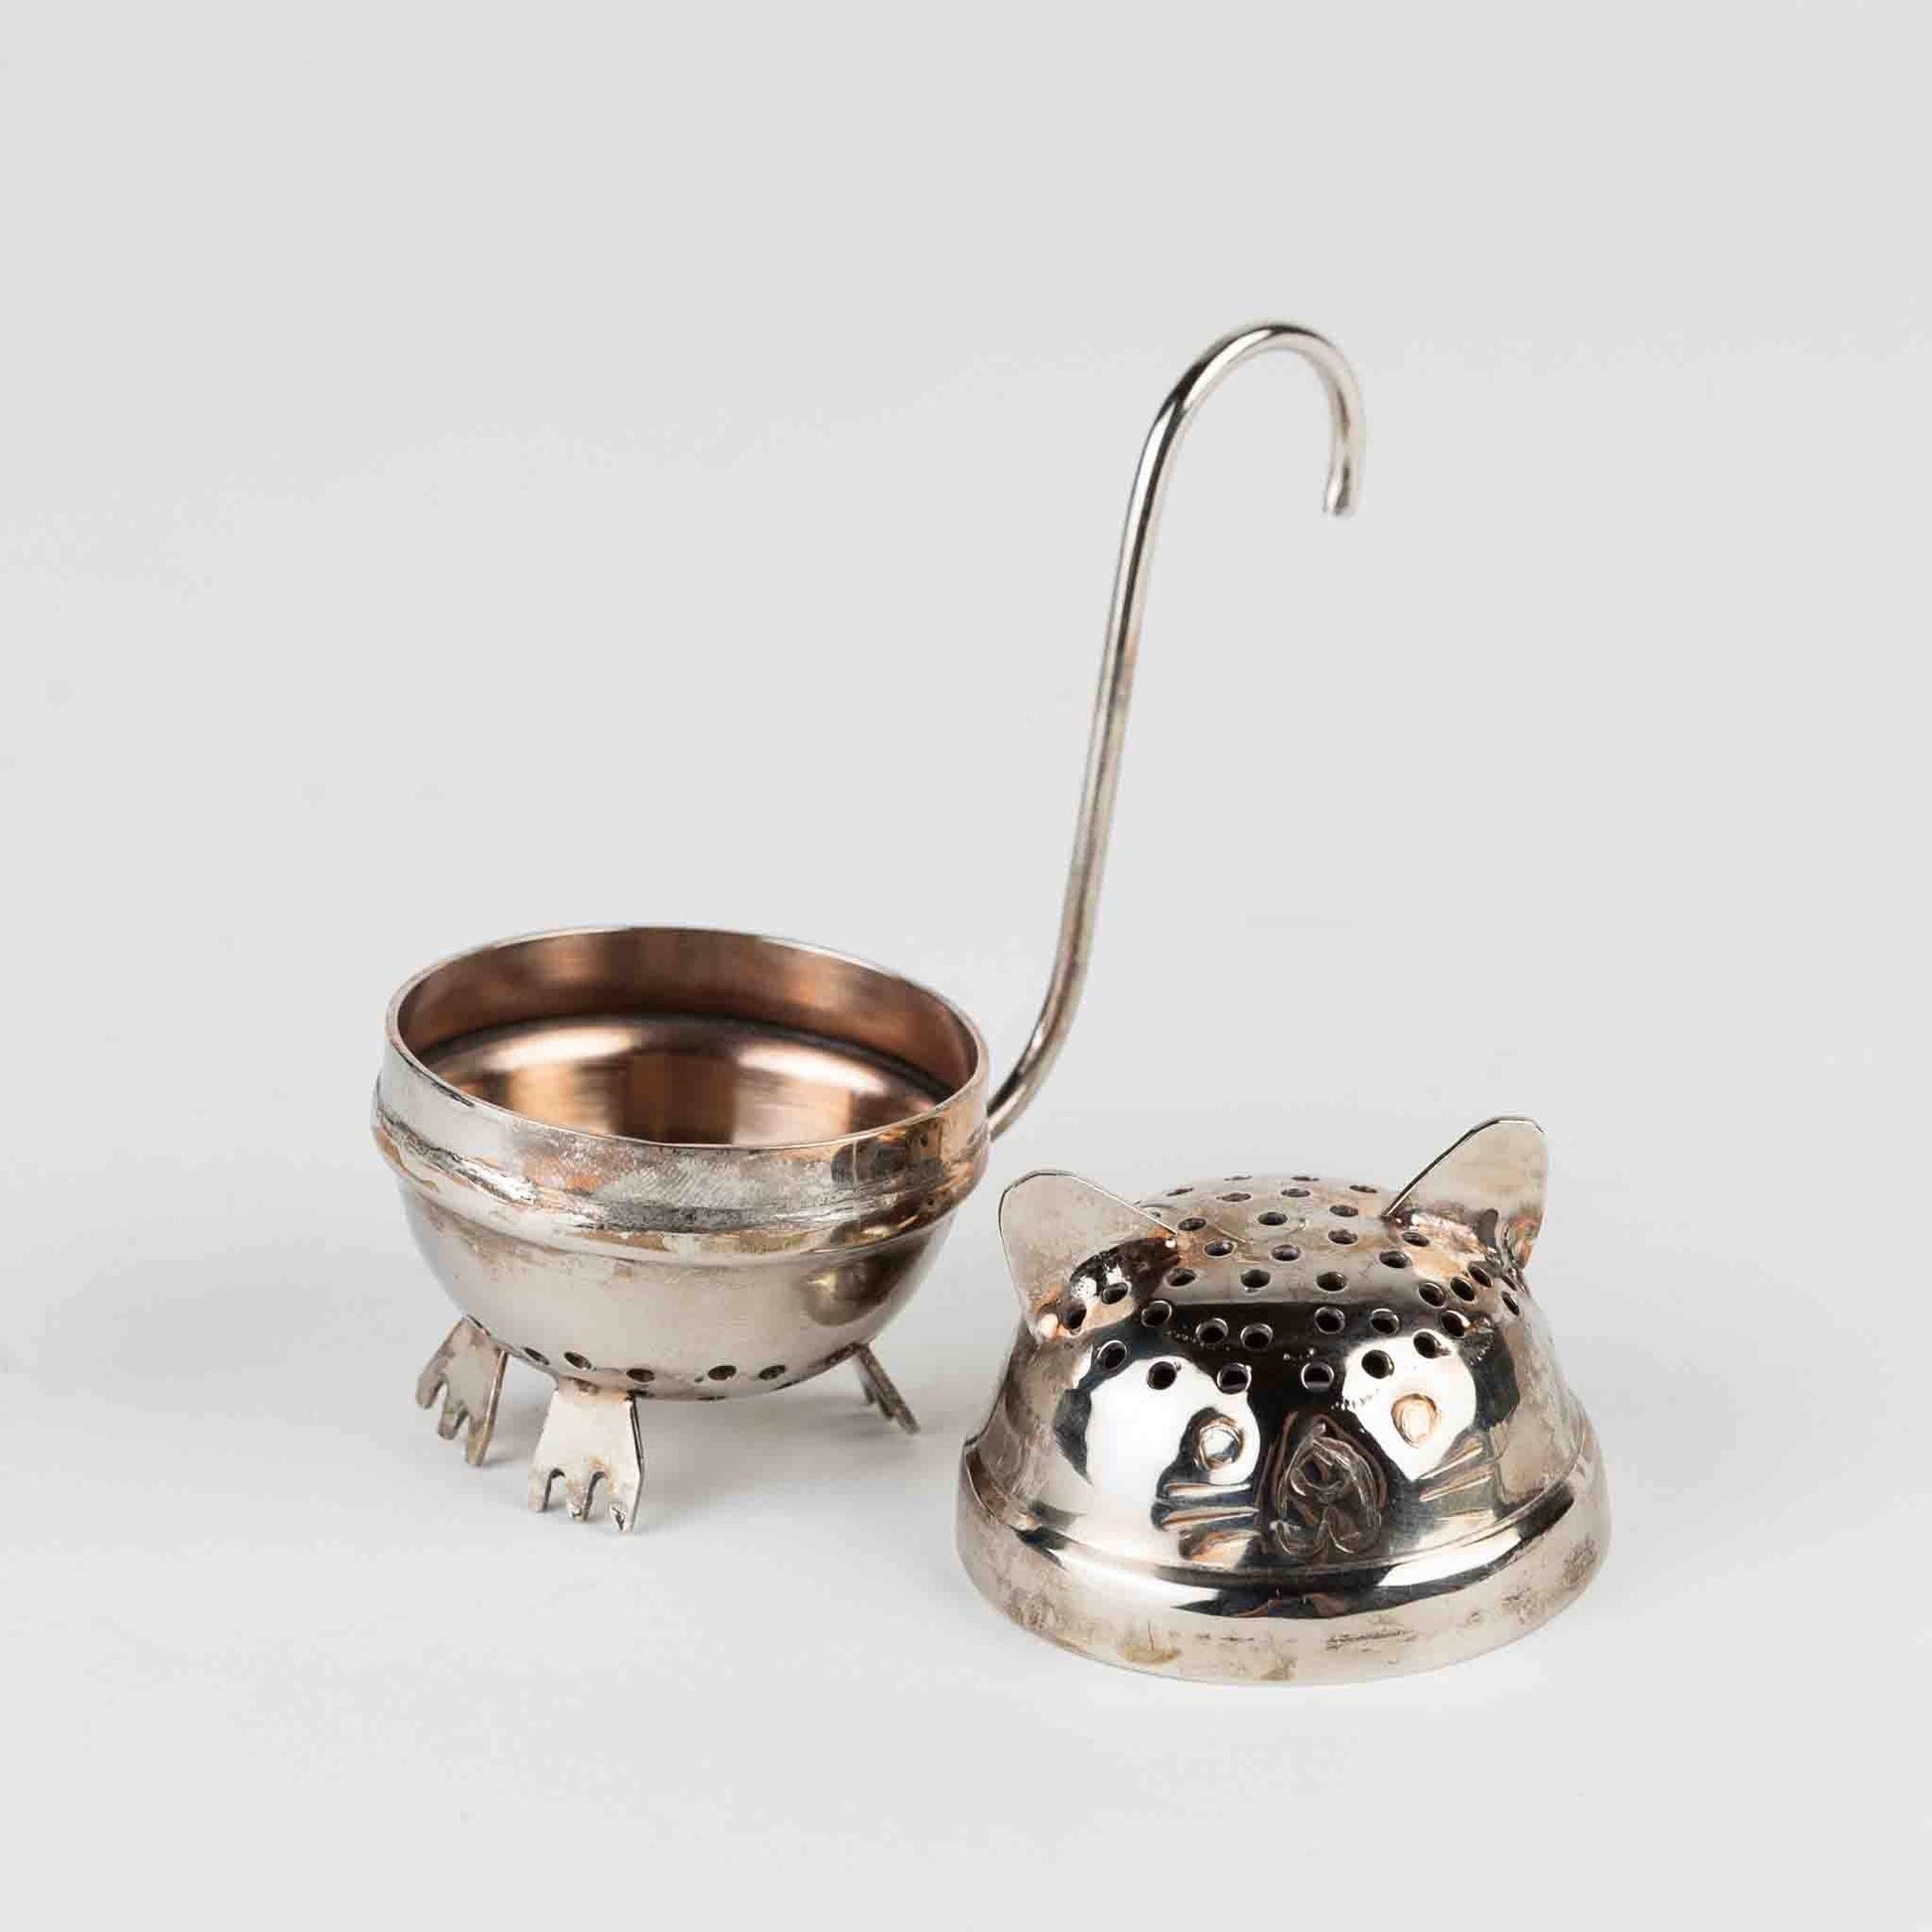 Ten Thousand Villages - Billee Standing Cat Tea Ball Infuser  Ten Thousand Villages   -better made easy-eco-friendly-sustainable-gifting